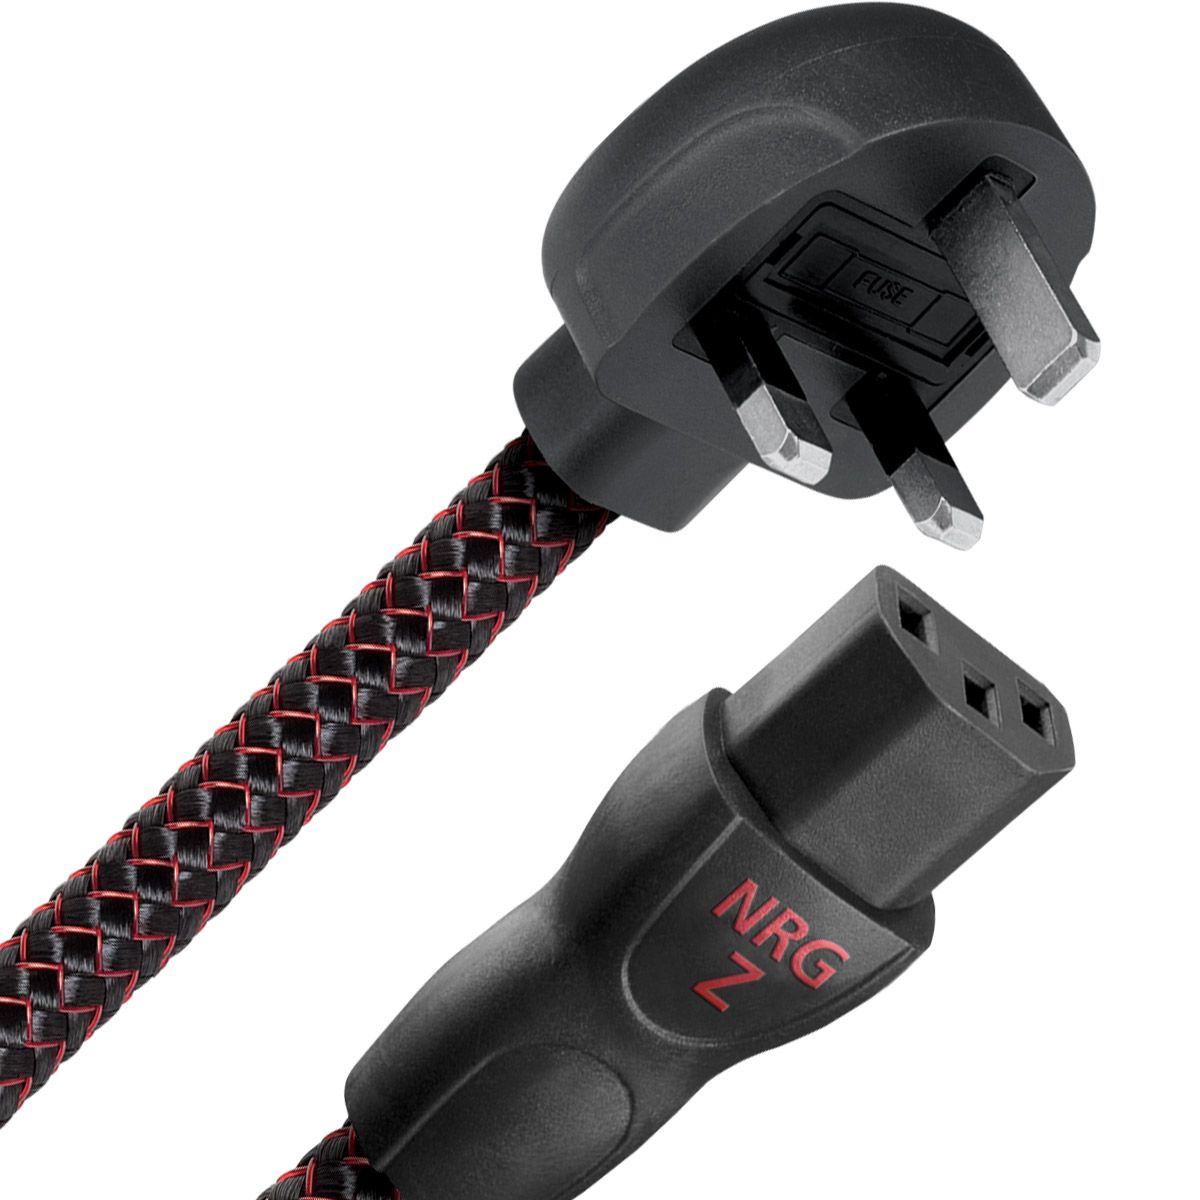 AudioQuest NRG-Z3 Mains Cable